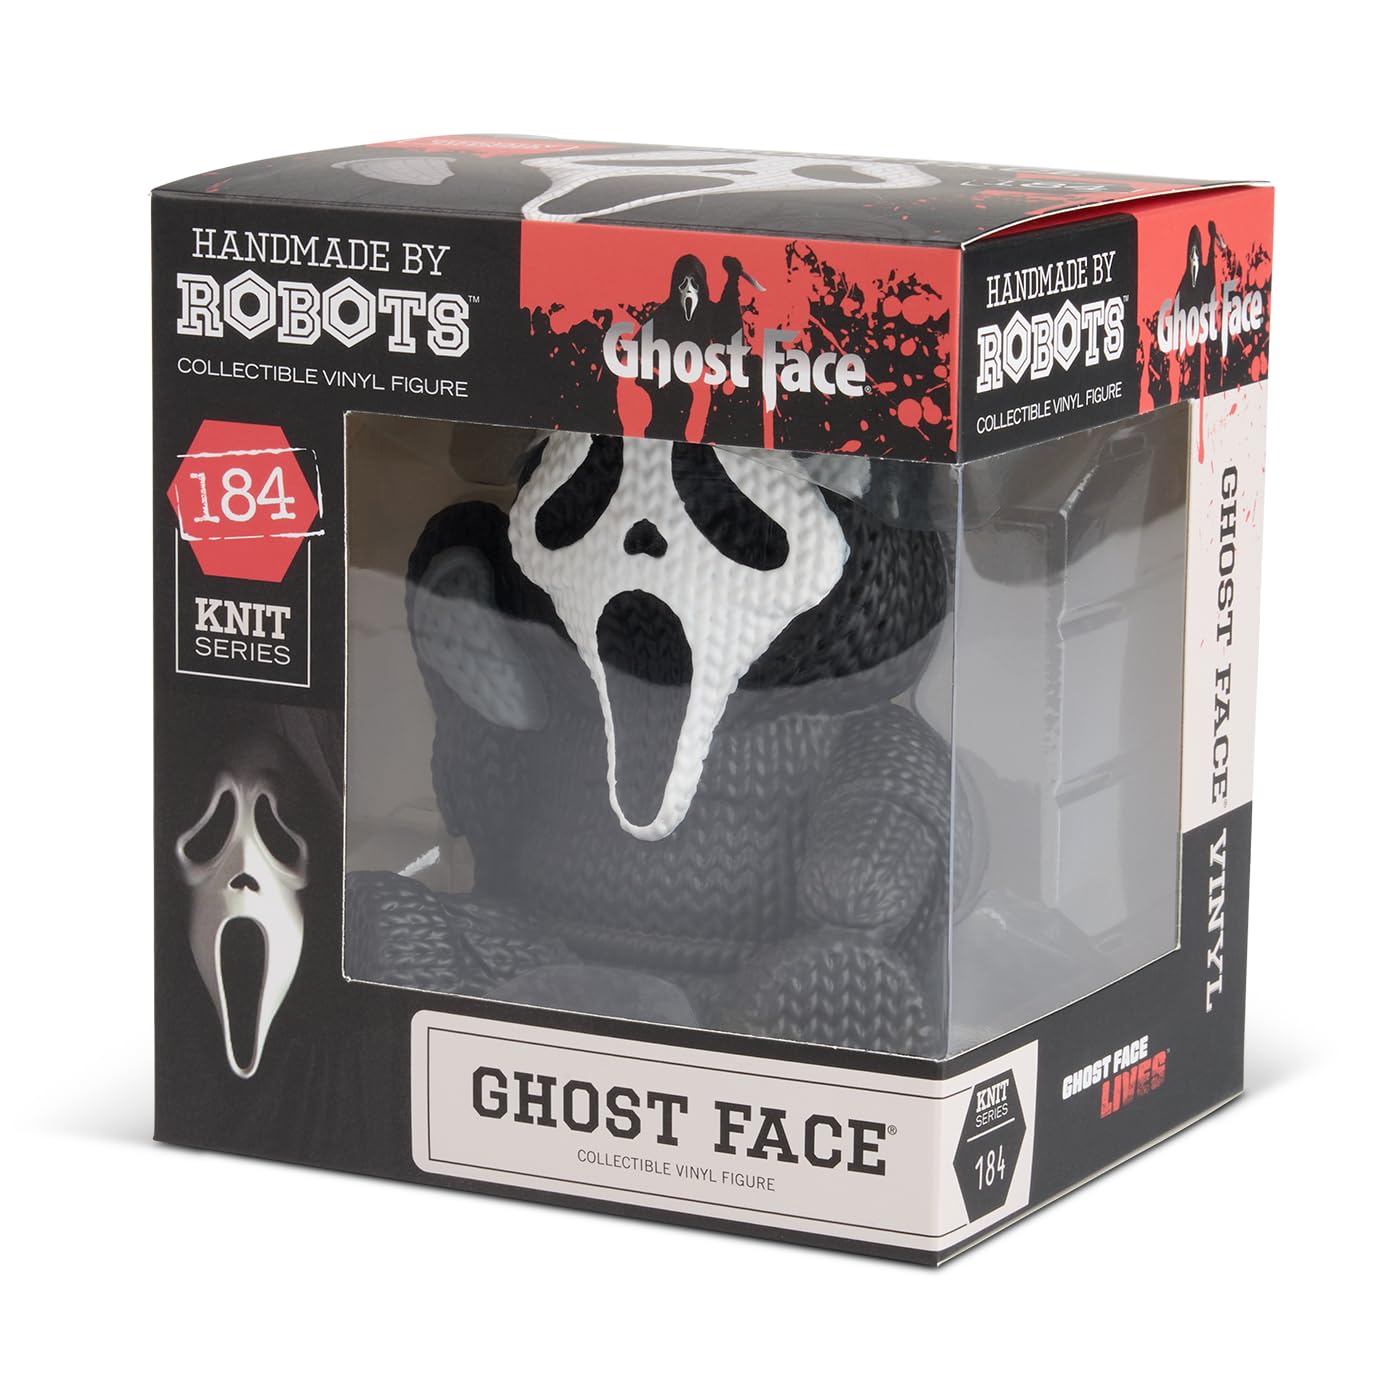 Handmade by Robots Ghost Face Version 2